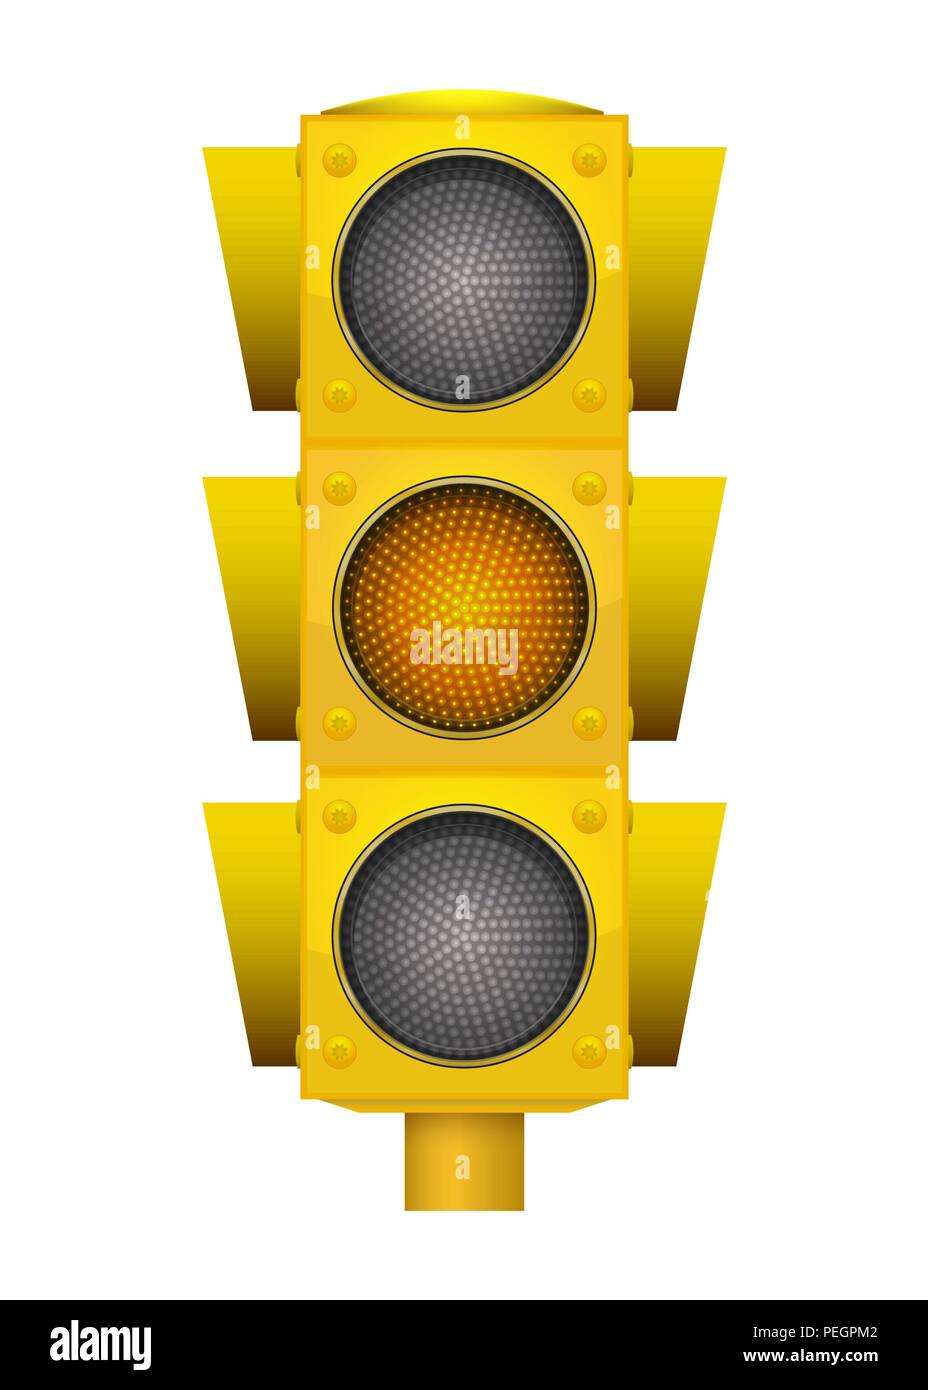 Realistic illustration of modern yellow led traffic light with switching on yellow light. Stock Vector